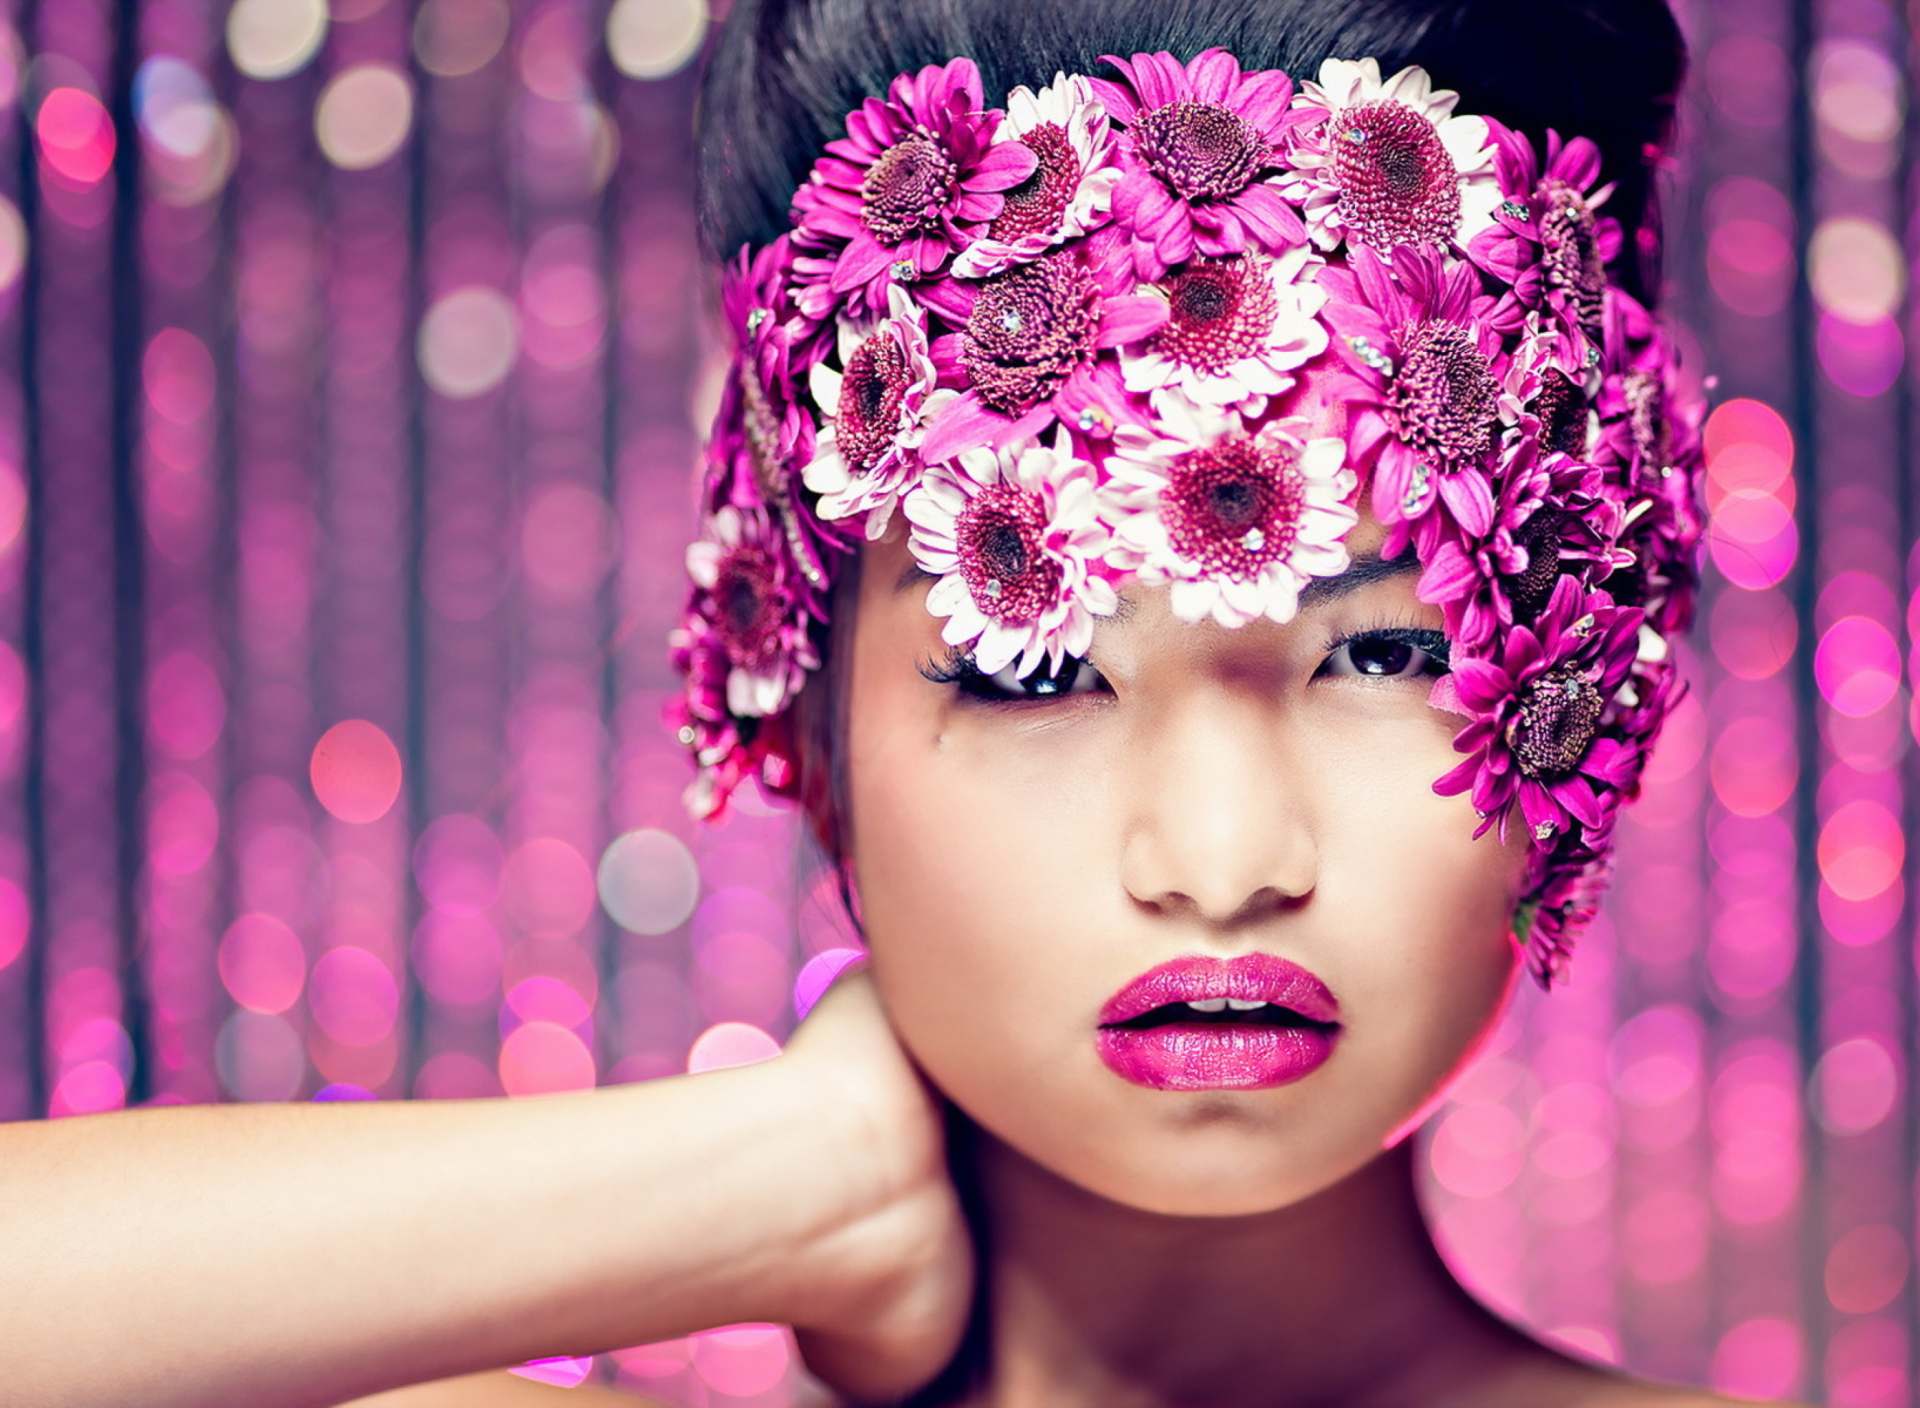 Asian Fashion Model With Pink Flower Wreath wallpaper 1920x1408